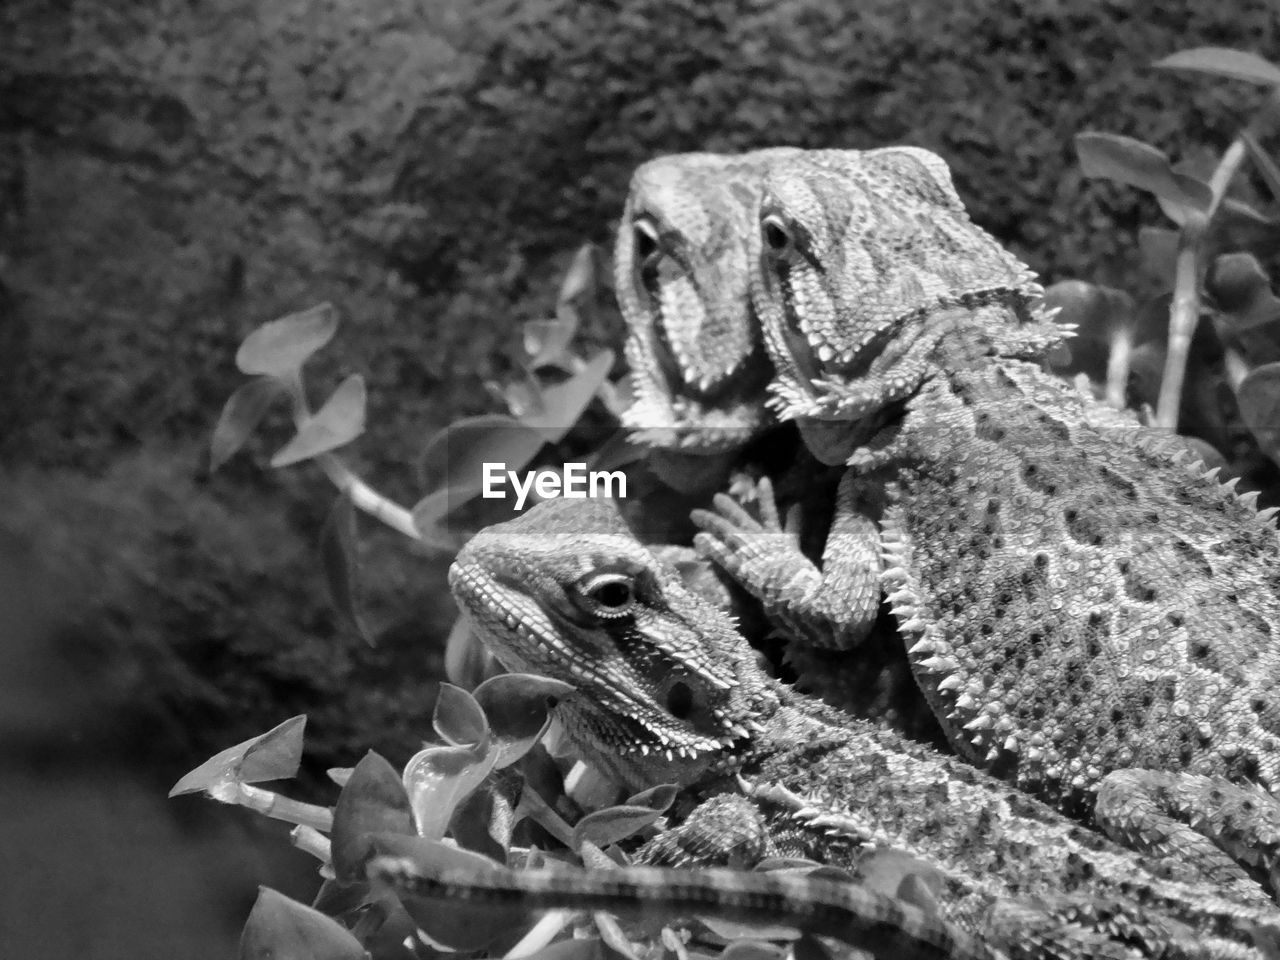 black and white, animal themes, animal, reptile, animal wildlife, monochrome, wildlife, monochrome photography, nature, lizard, no people, one animal, day, focus on foreground, iguana, animal body part, outdoors, close-up, plant